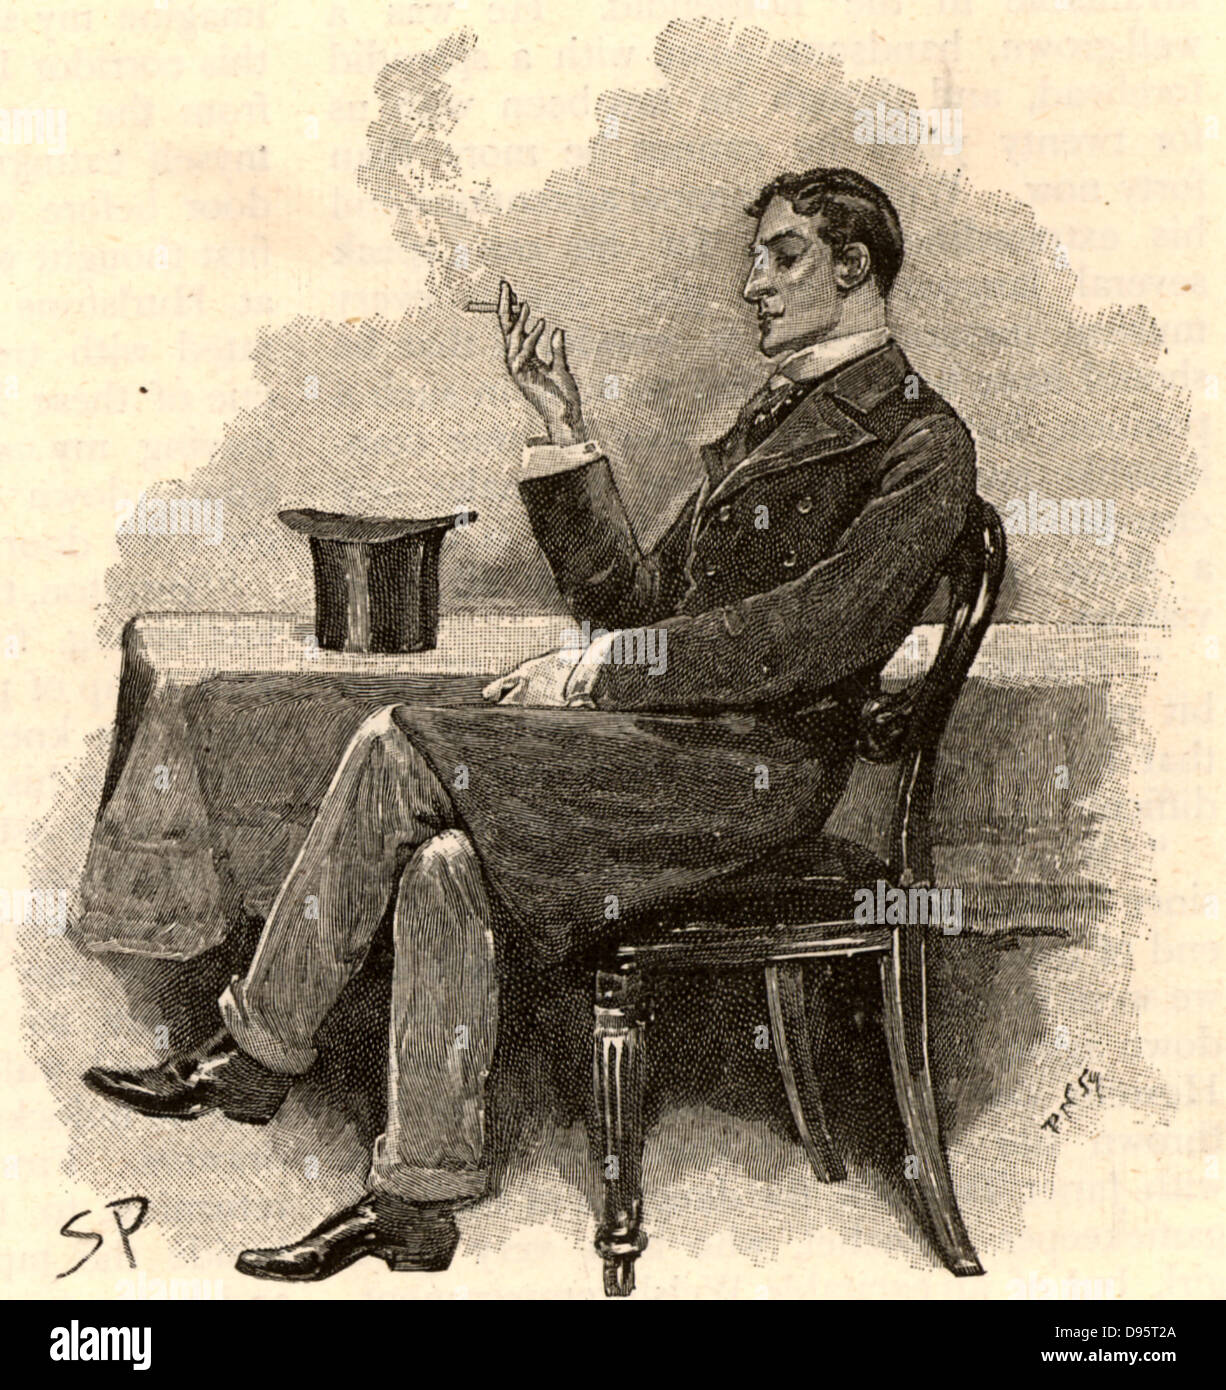 The Adventure of the Musgrave Ritual'. Reginald Musgrave, a college friend of Holmes, asking for help in clearing up the mystery of the disappearance of his butler. From 'The Adventures of Sherlock Holmes' by Conan Doyle from 'The Strand Magazine' (London, 1893). Illustration by Sidney E Paget, the first artist to draw Sherlock Holmes.  Engraving. Stock Photo